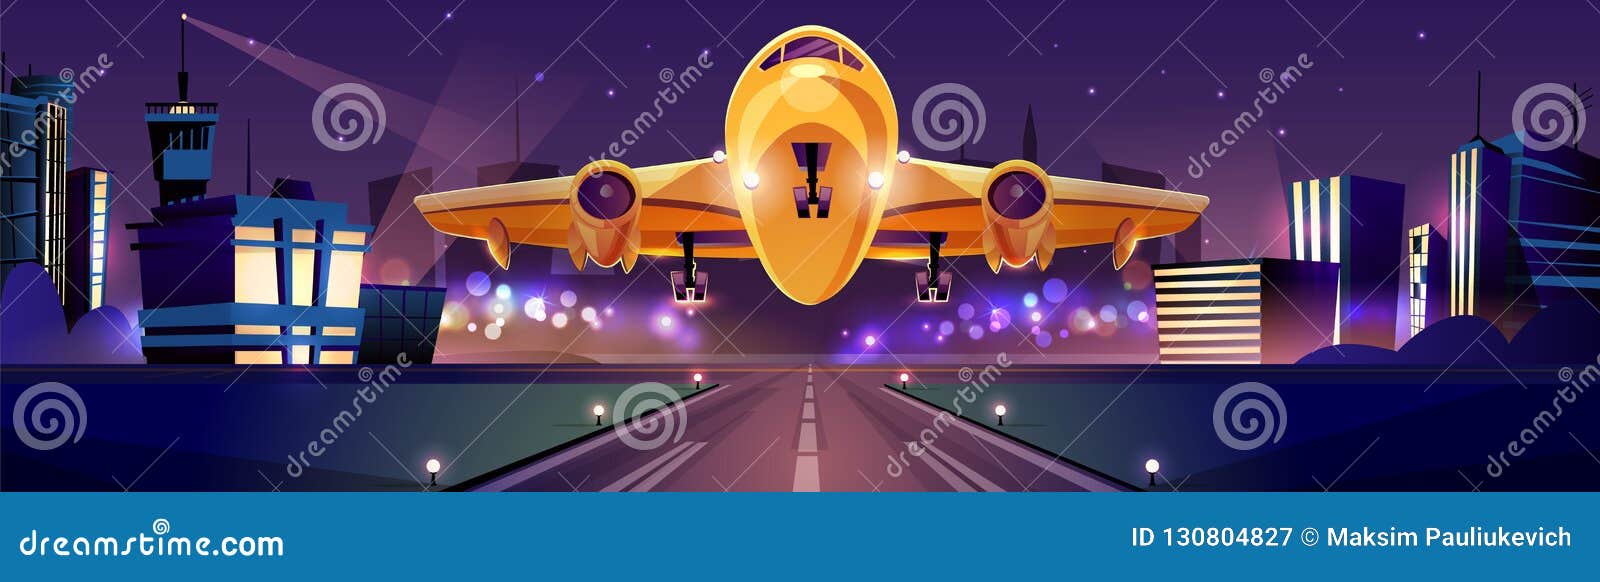 Airplane Taking Off from Airport Runaway Vector Stock Vector - Illustration  of commercial, cartoon: 130804827